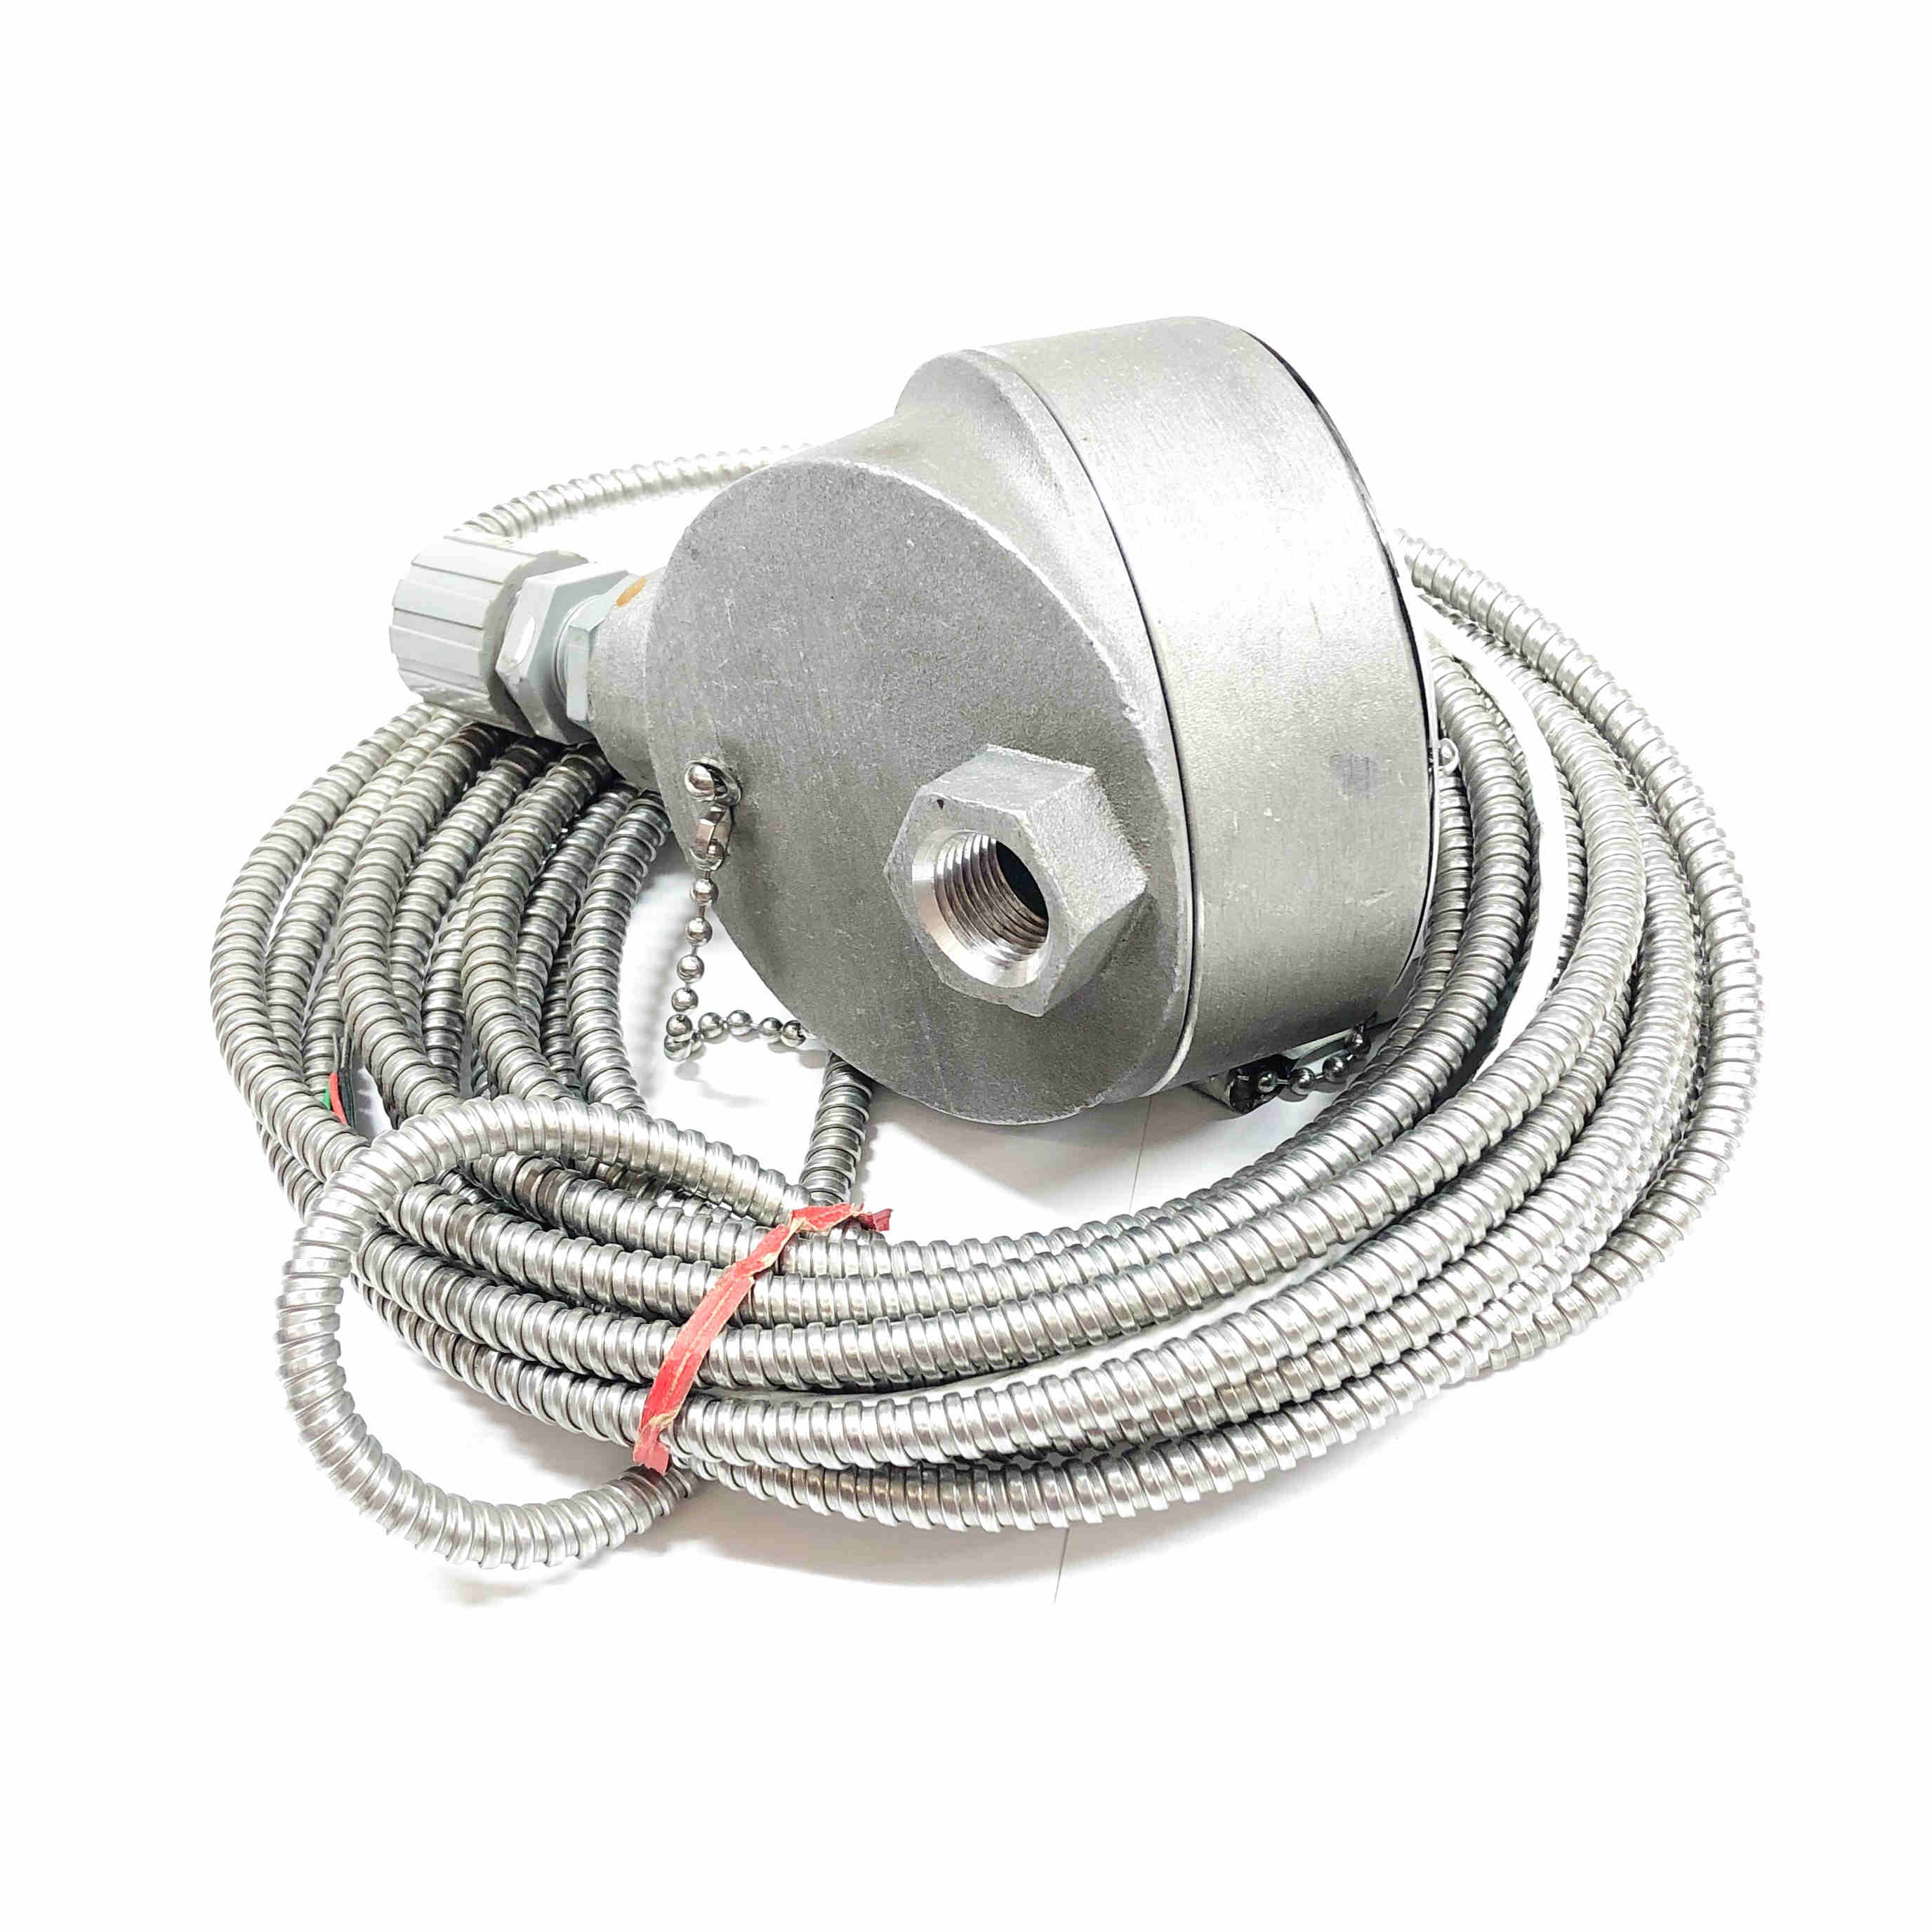 14372 Burns Explosion Proof Connection Head with Cable, Max Amb 200 Deg F 3